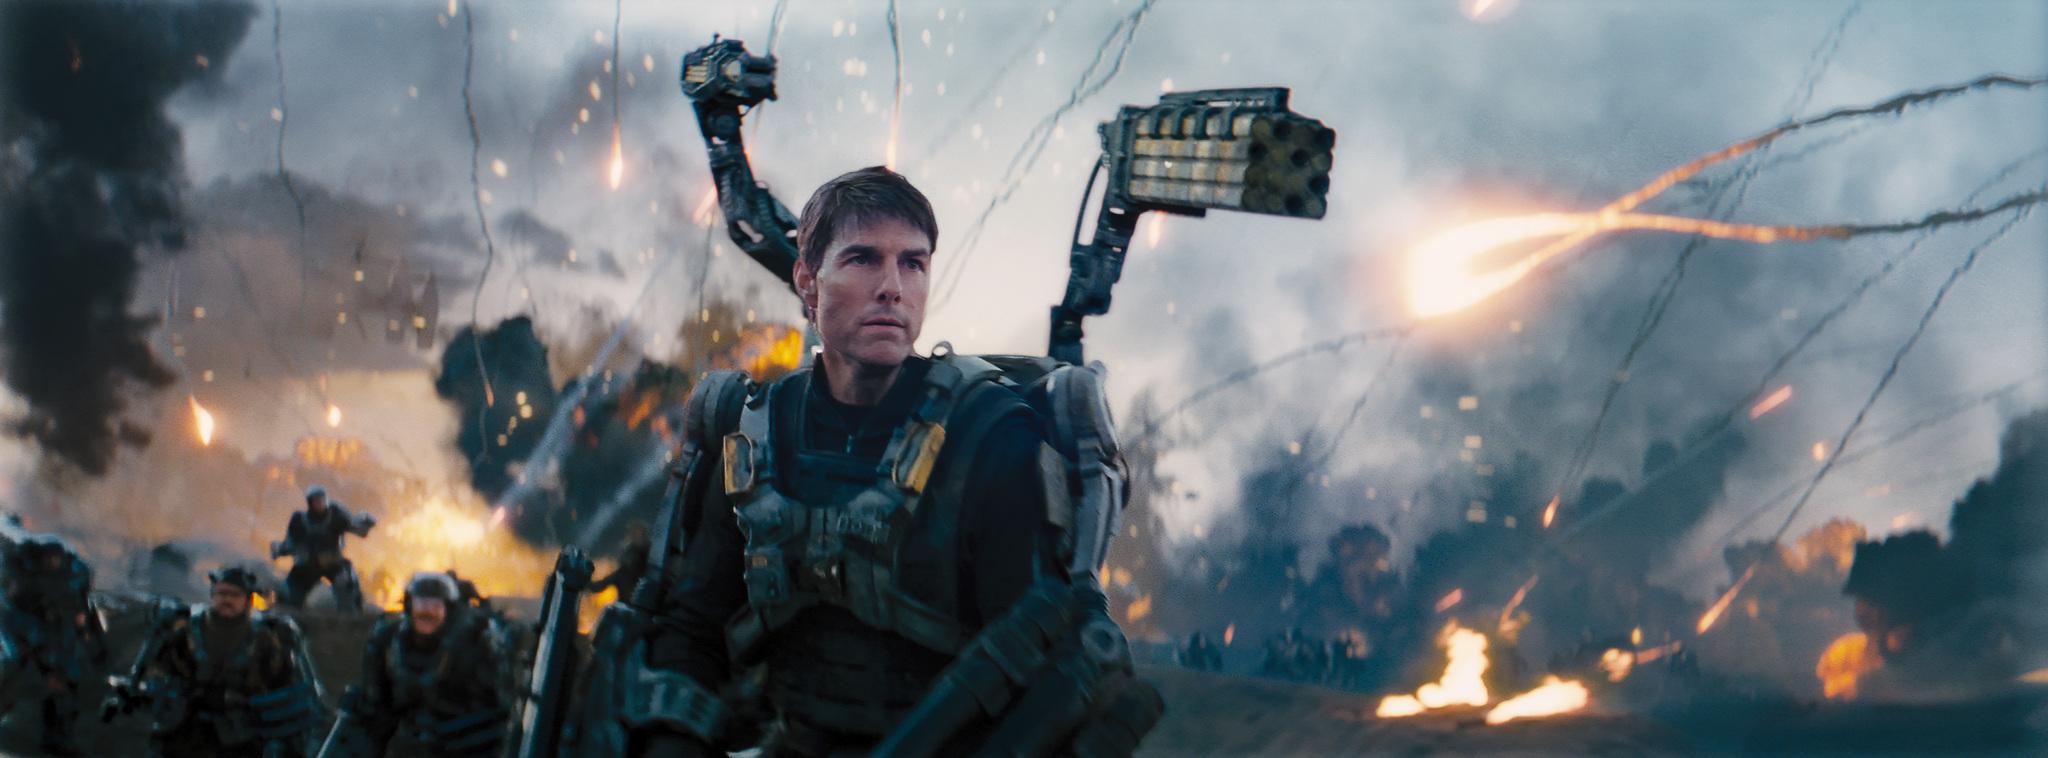 gåde Broderskab parti Watch the Extended 'Edge of Tomorrow' Trailer...and Then Repeat - Bloody  Disgusting